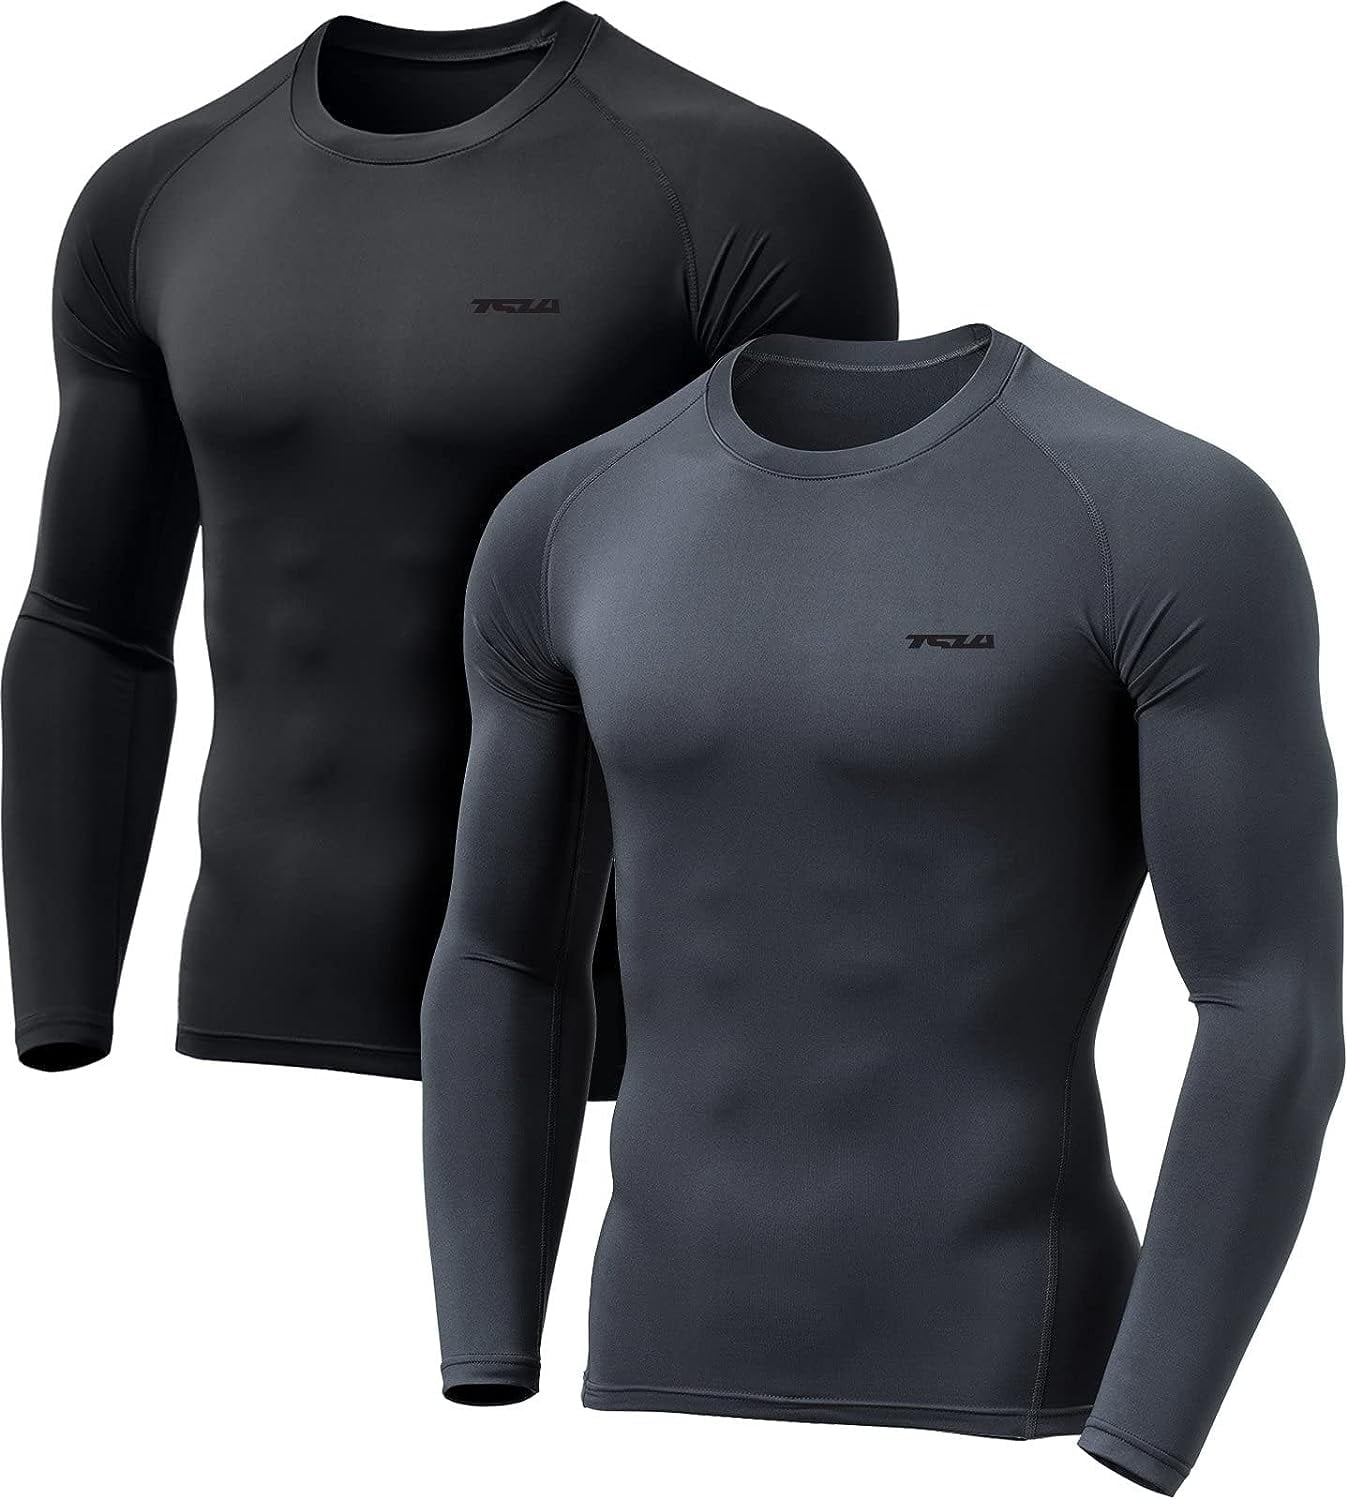 Men Thermal Flecce Long Sleeve Compression Shirts Athletic Base Layer Top  Winter Male Gear Running T-Shirt